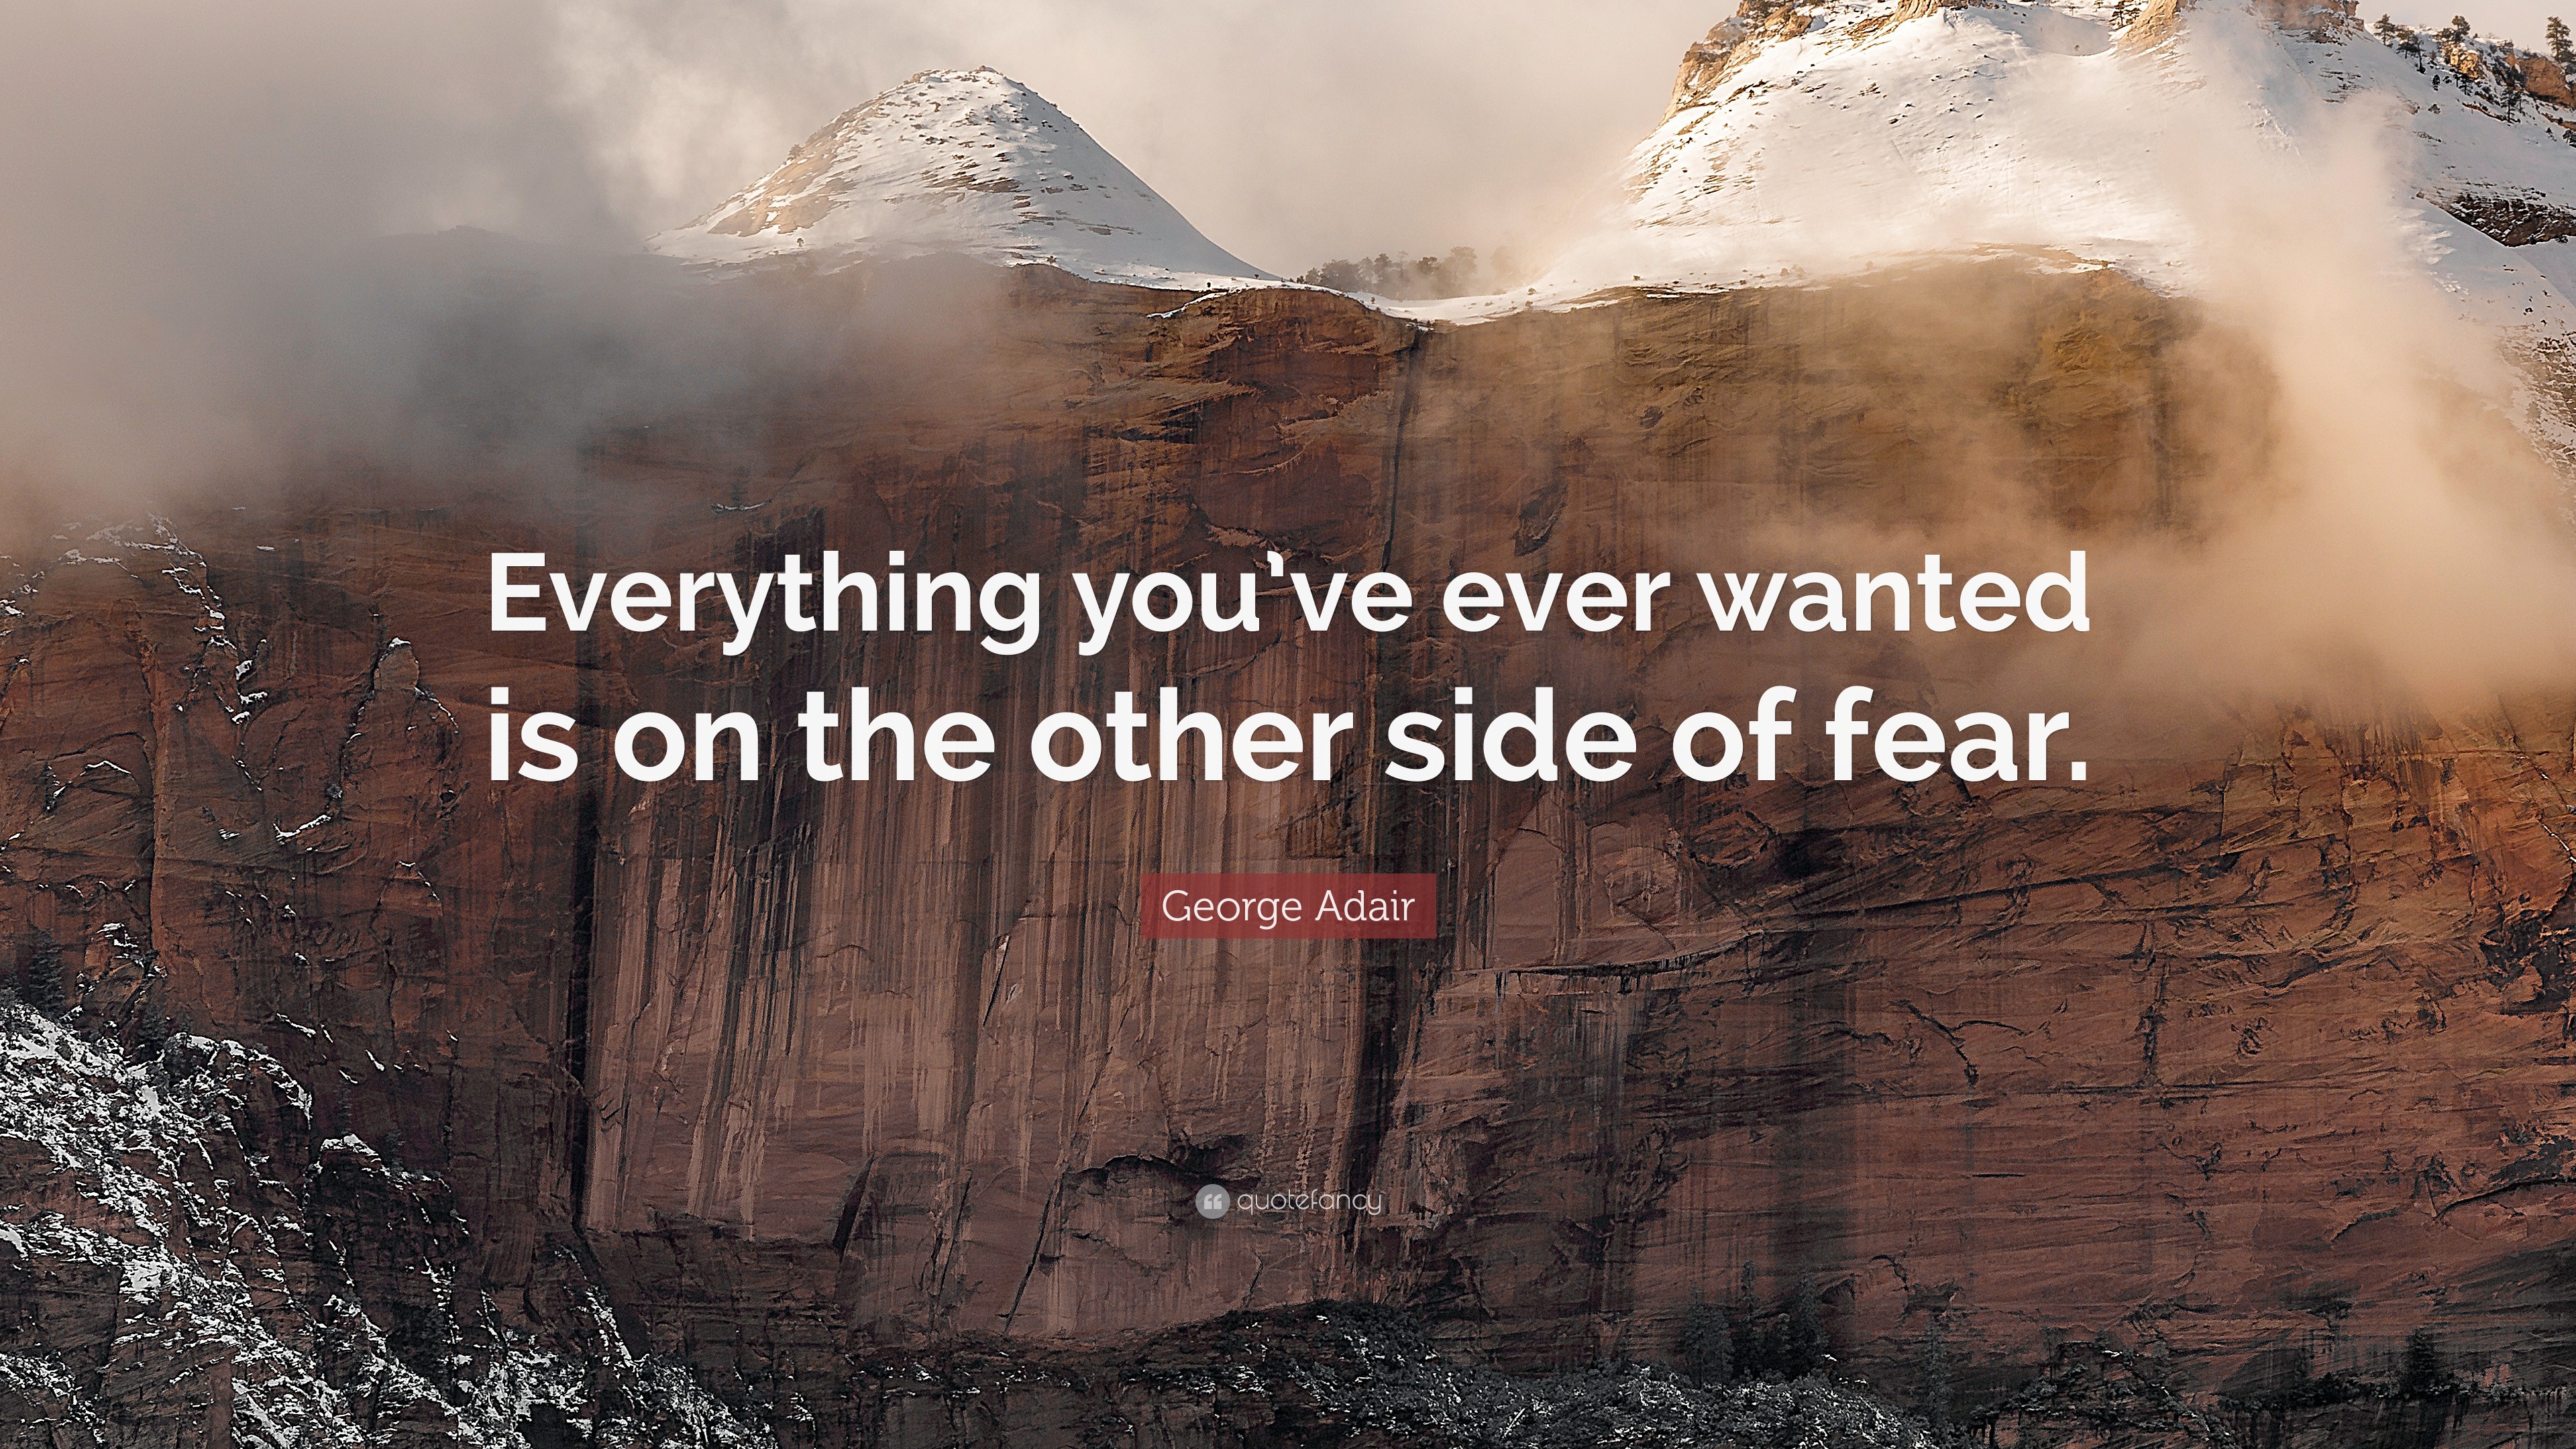 George Adair Quote: “Everything you’ve ever wanted is on the other side